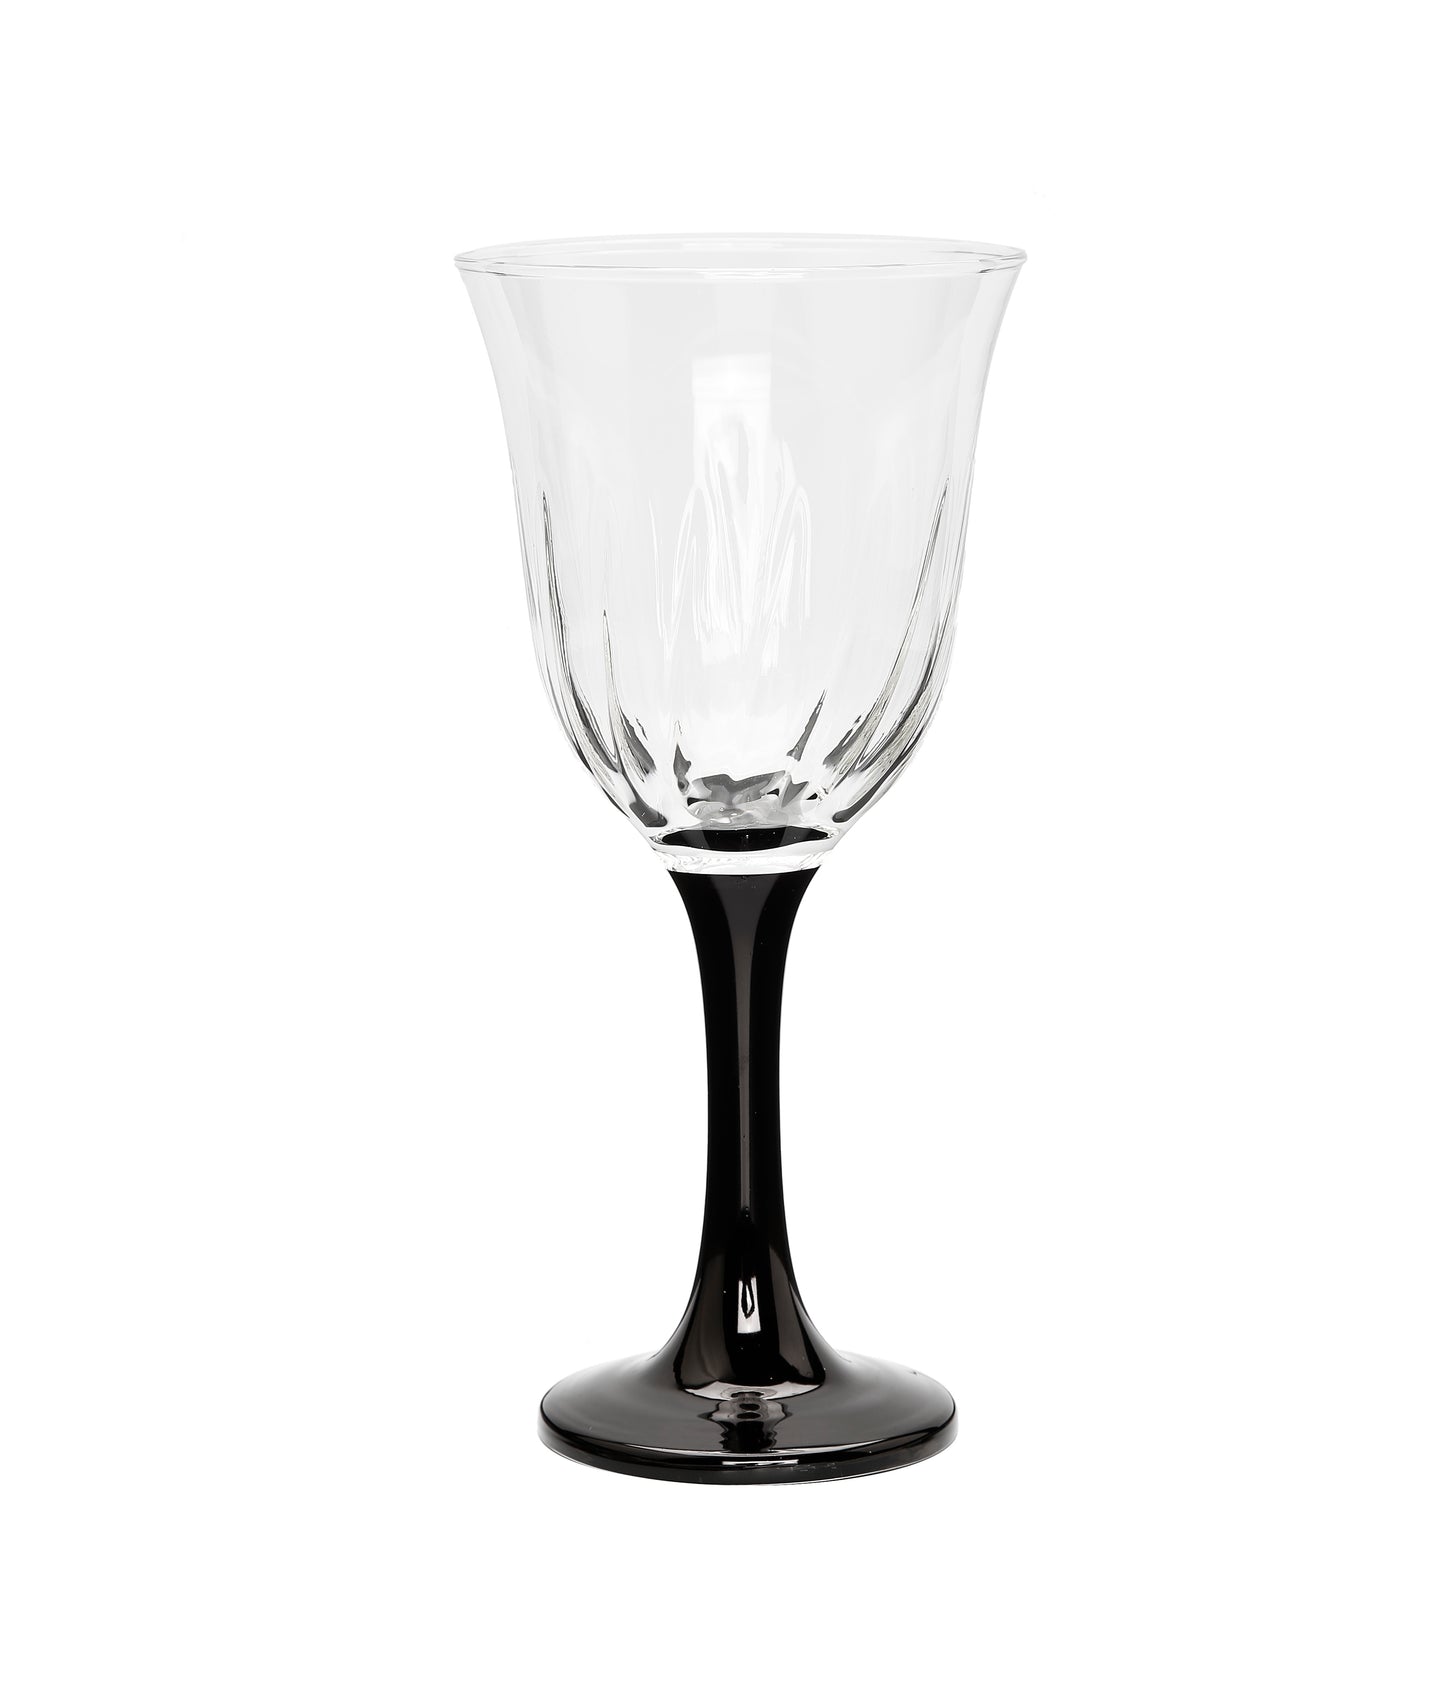 Set of 6 Black Footed Water Glasses